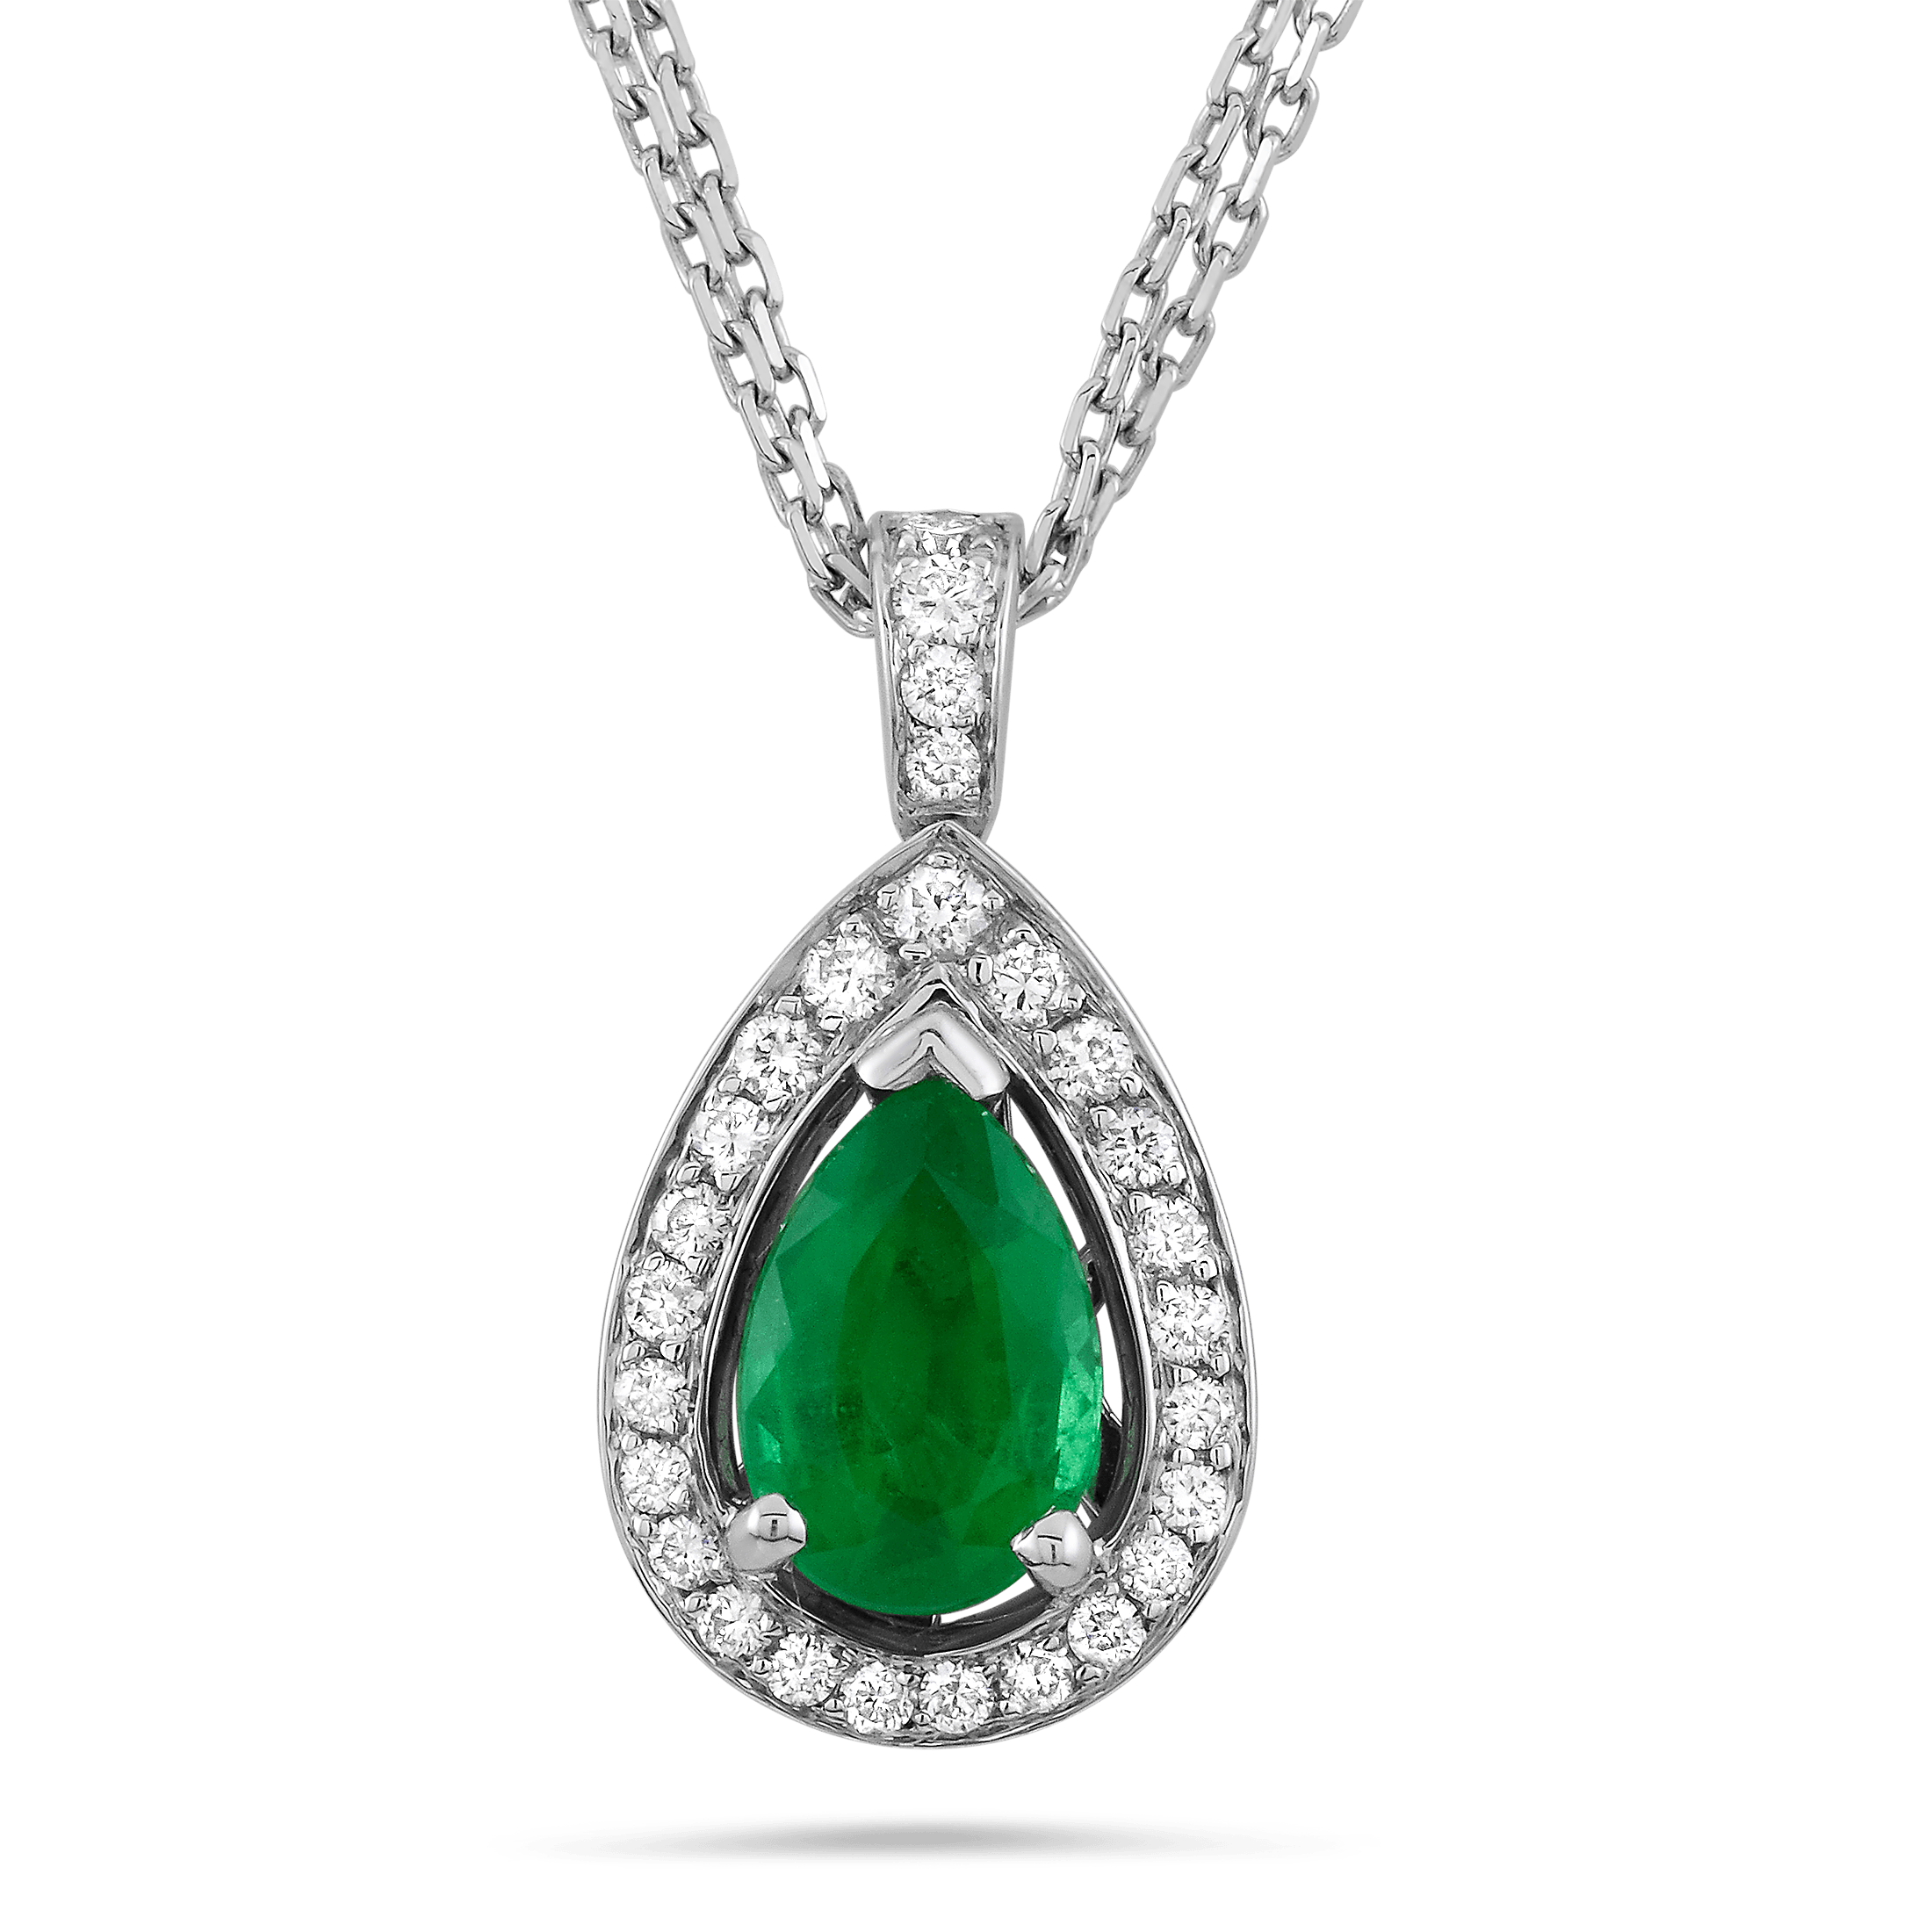 Download Jewelry Png Image HQ PNG Image | FreePNGImg